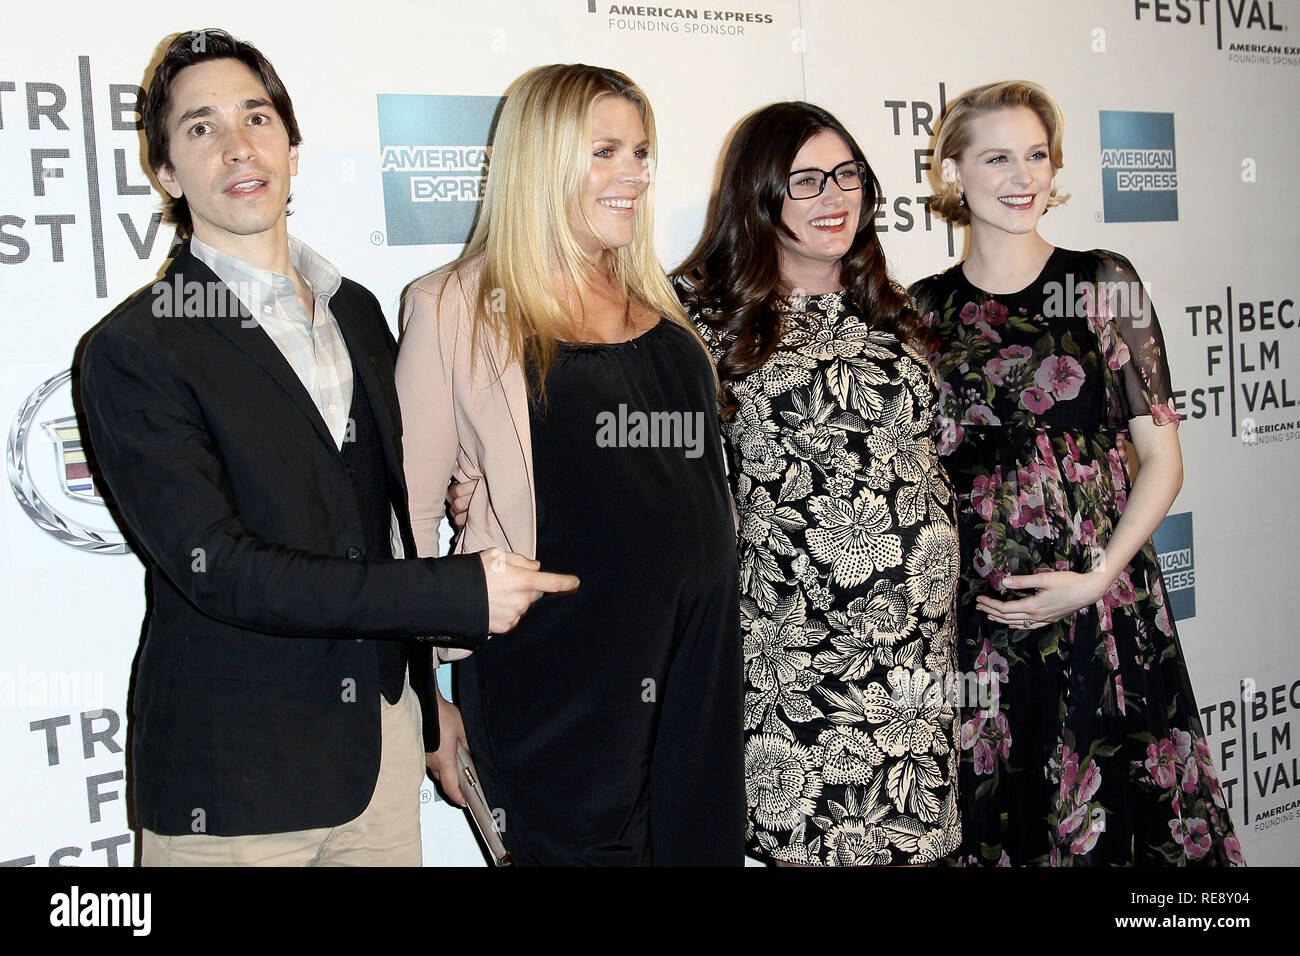 New York Ny April 21 Actors Justin Long Busy Philipps Director Kat Coiro And Actress Evan 